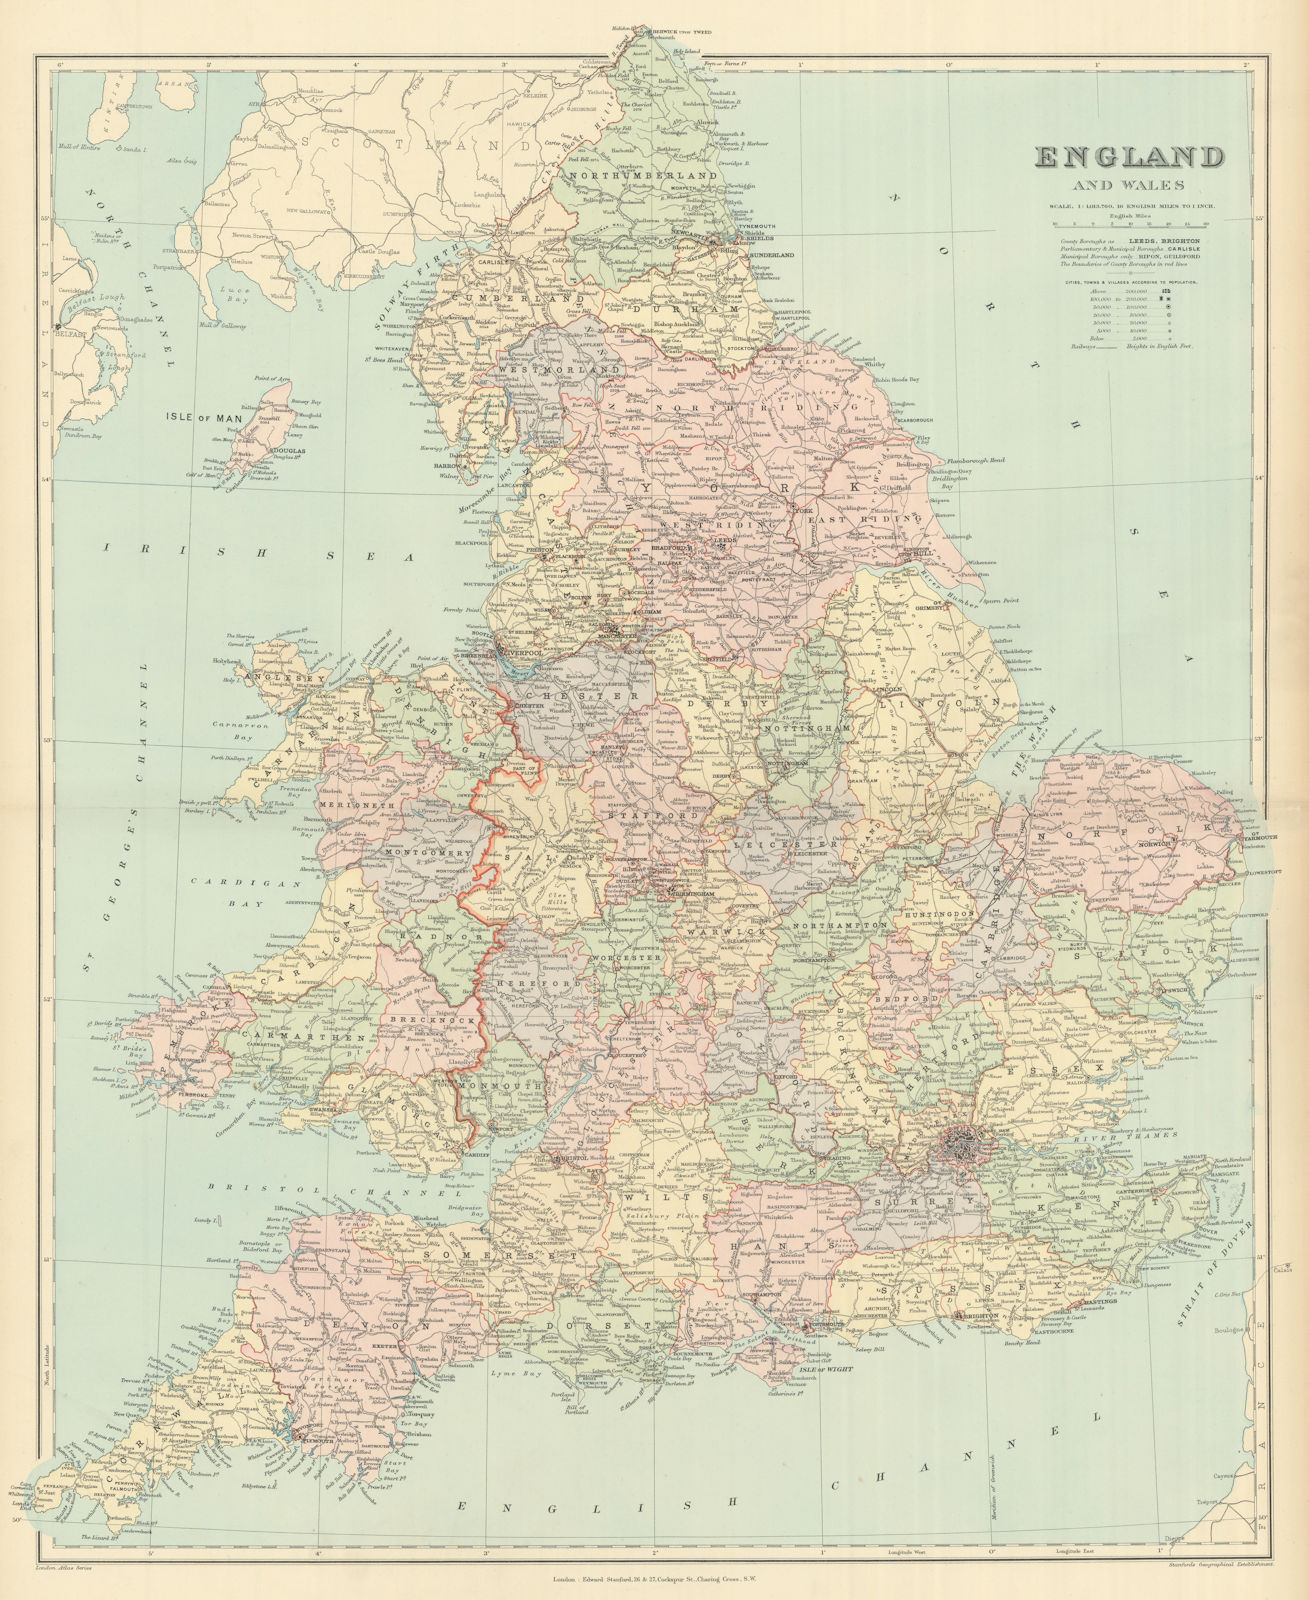 Associate Product England and Wales in counties. Railways. Large 68x55cm. STANFORD 1894 old map